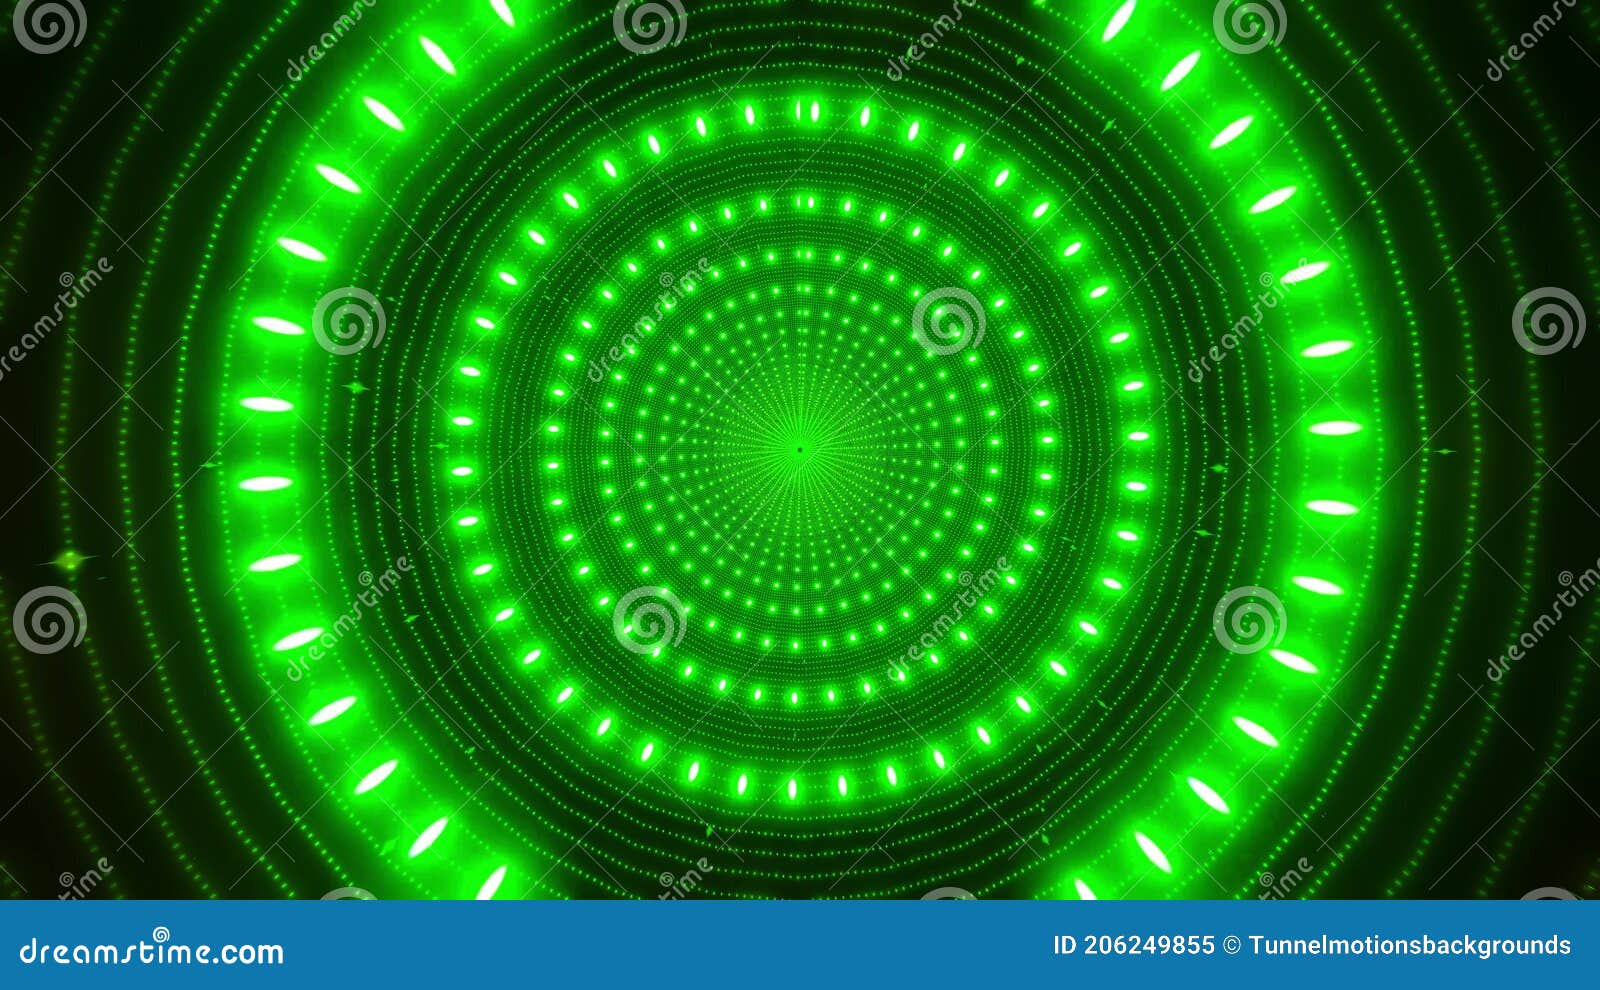 Green Neon Particles Green Glowing Design Tunnel 3d Illustration Background  Wallpaper Design Artwork Stock Illustration - Illustration of artwork,  tunnelmotions: 206249855